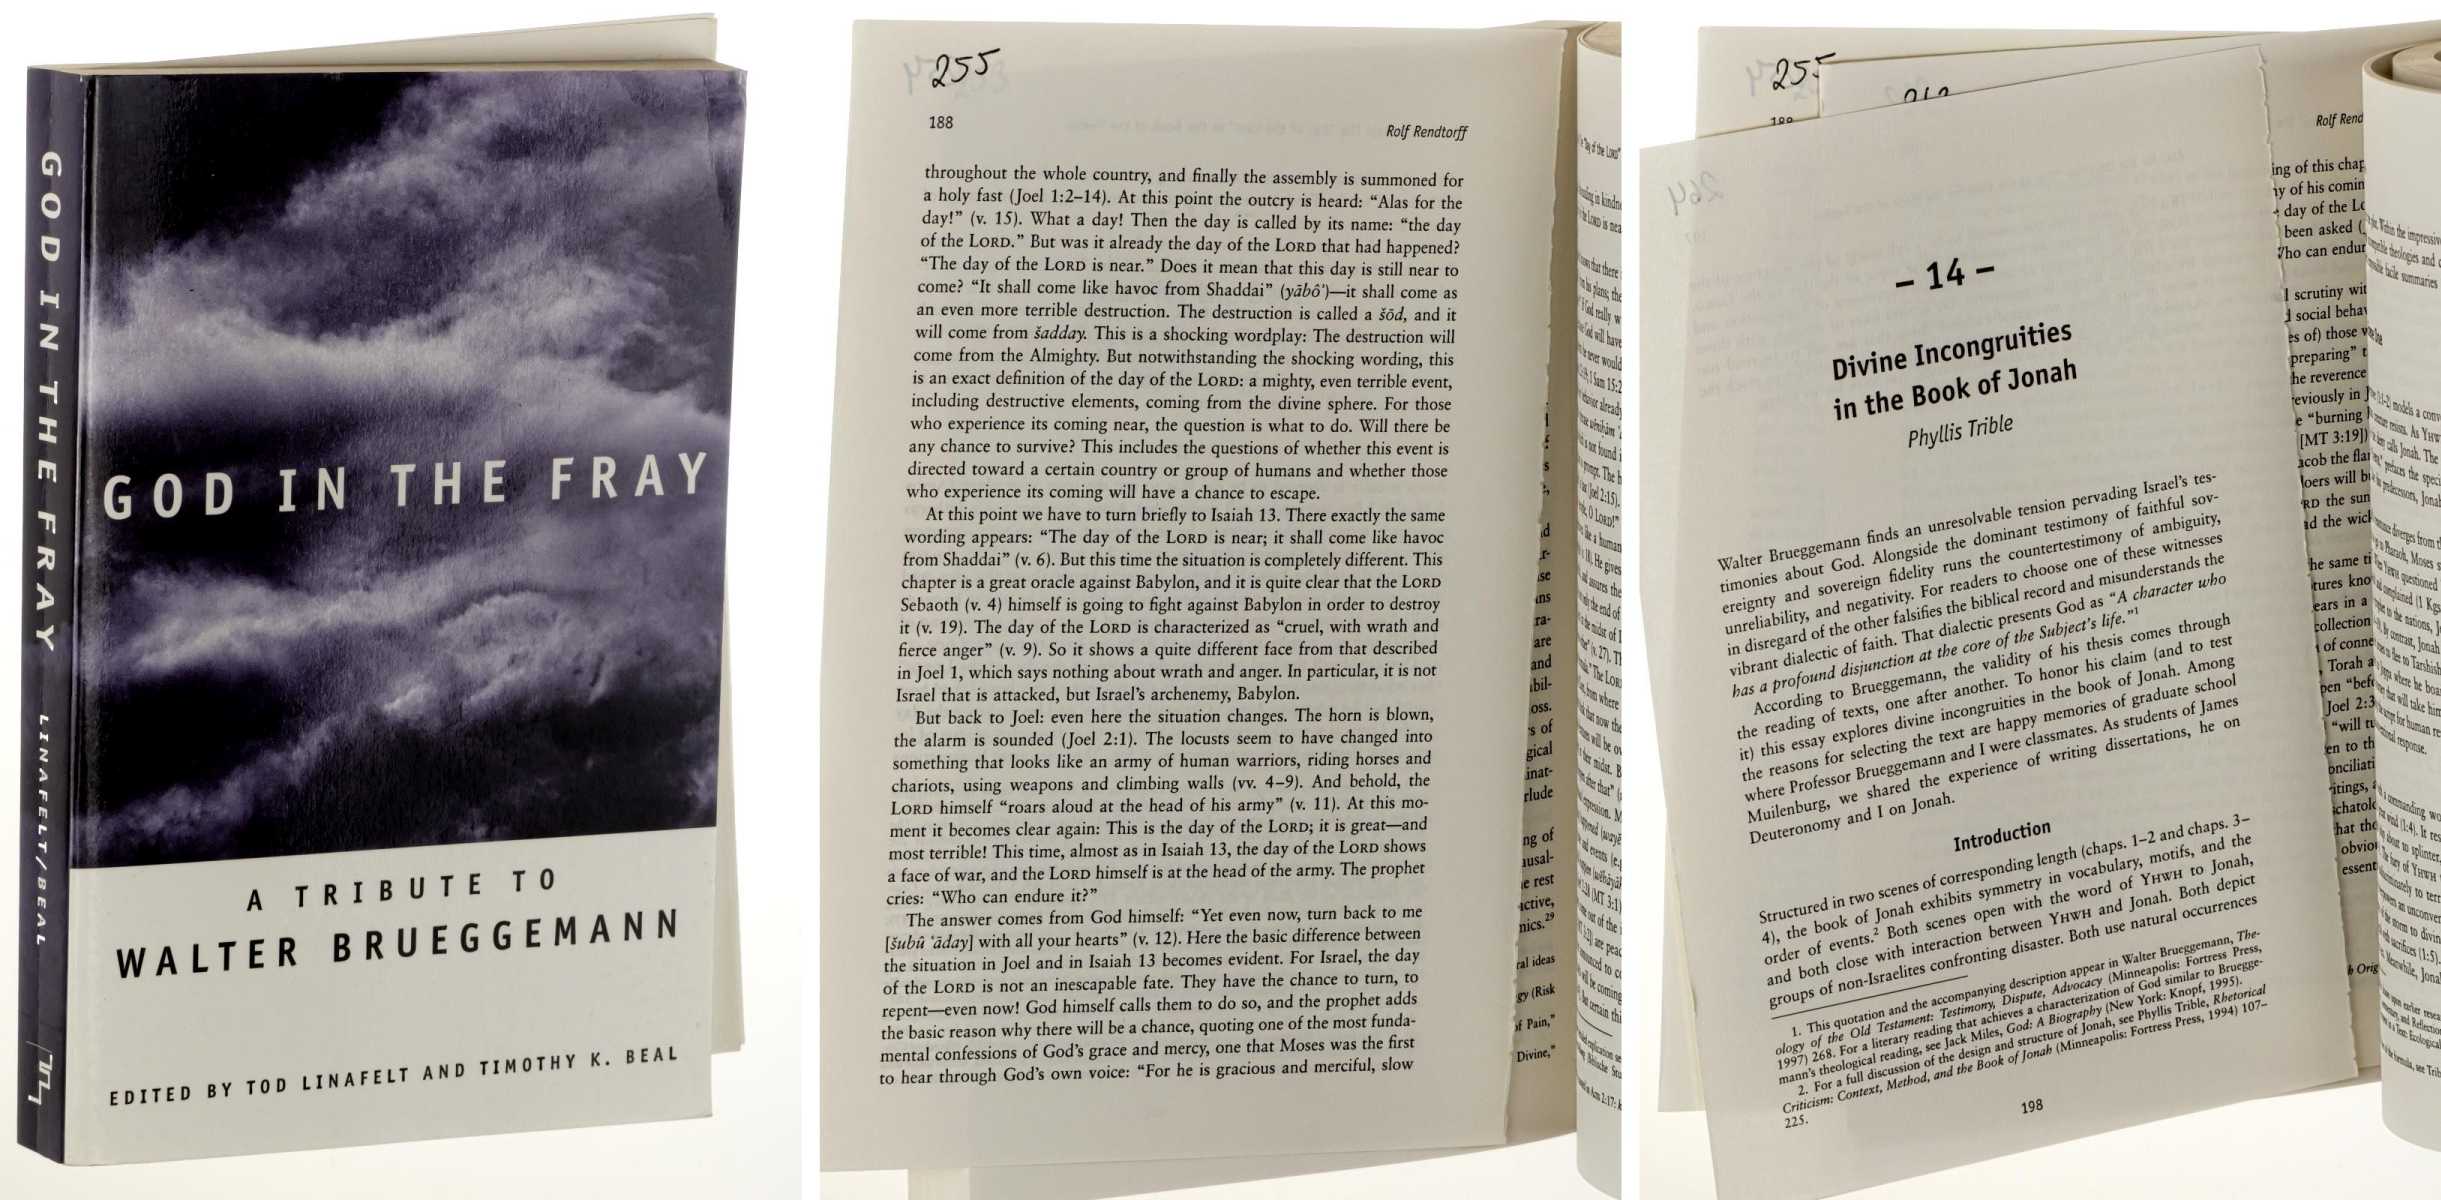   God in the Fray. A Tribute to Walter Brueggemann. Ed. by Tod Linafelt and Timothy K. Beal. 